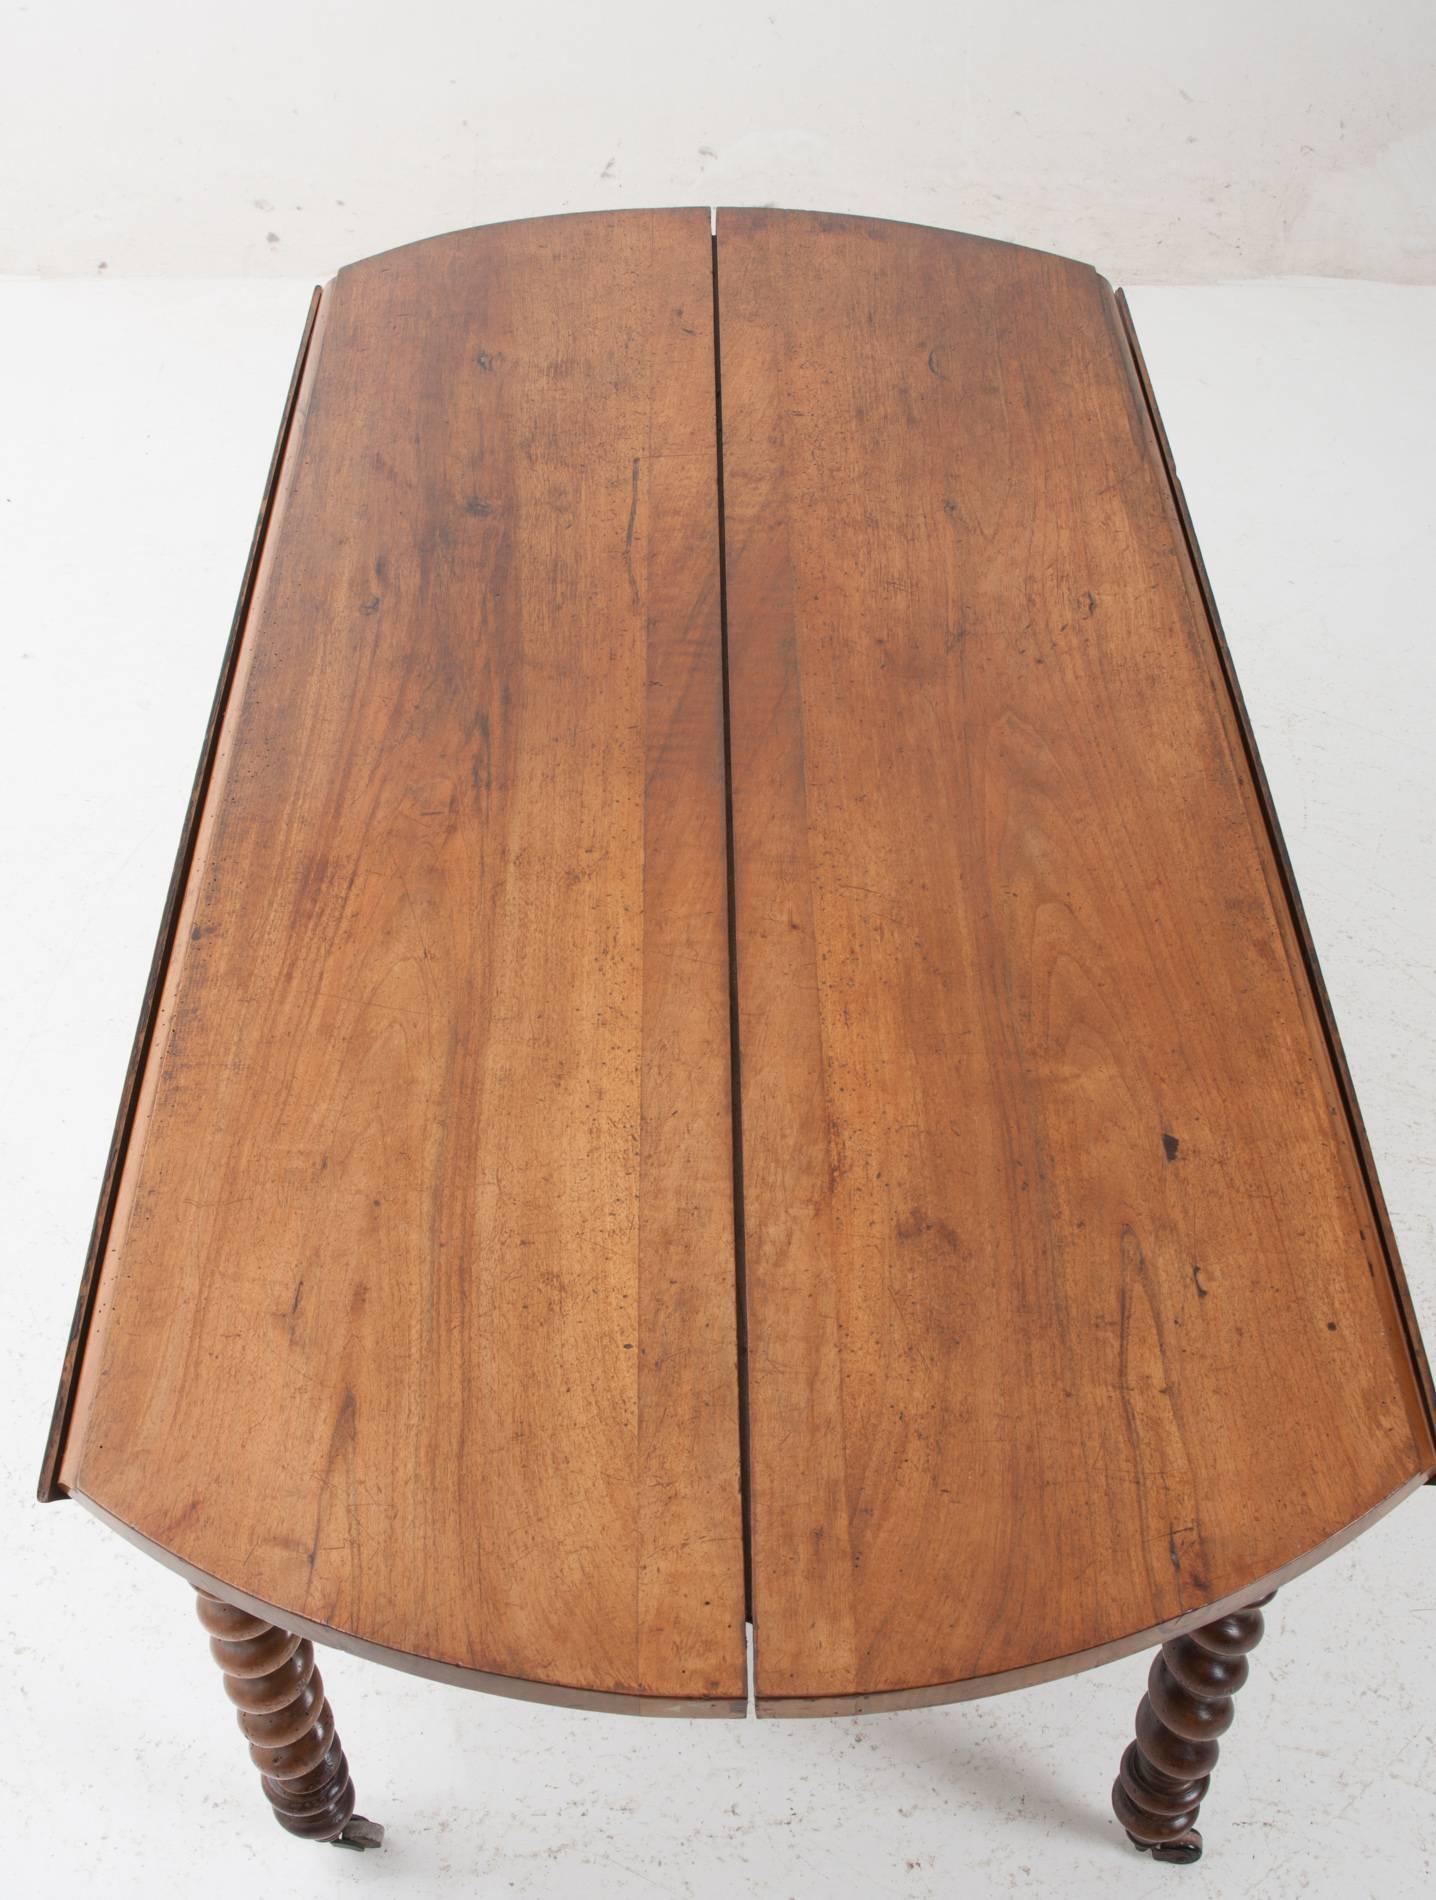 This drop-leaf side table has a rich cherry patina all around. Two wide planks make up for the center of the table while single plank demilune leaves drop to the sides. This table can expand with additional leaves as the center of the table pulls